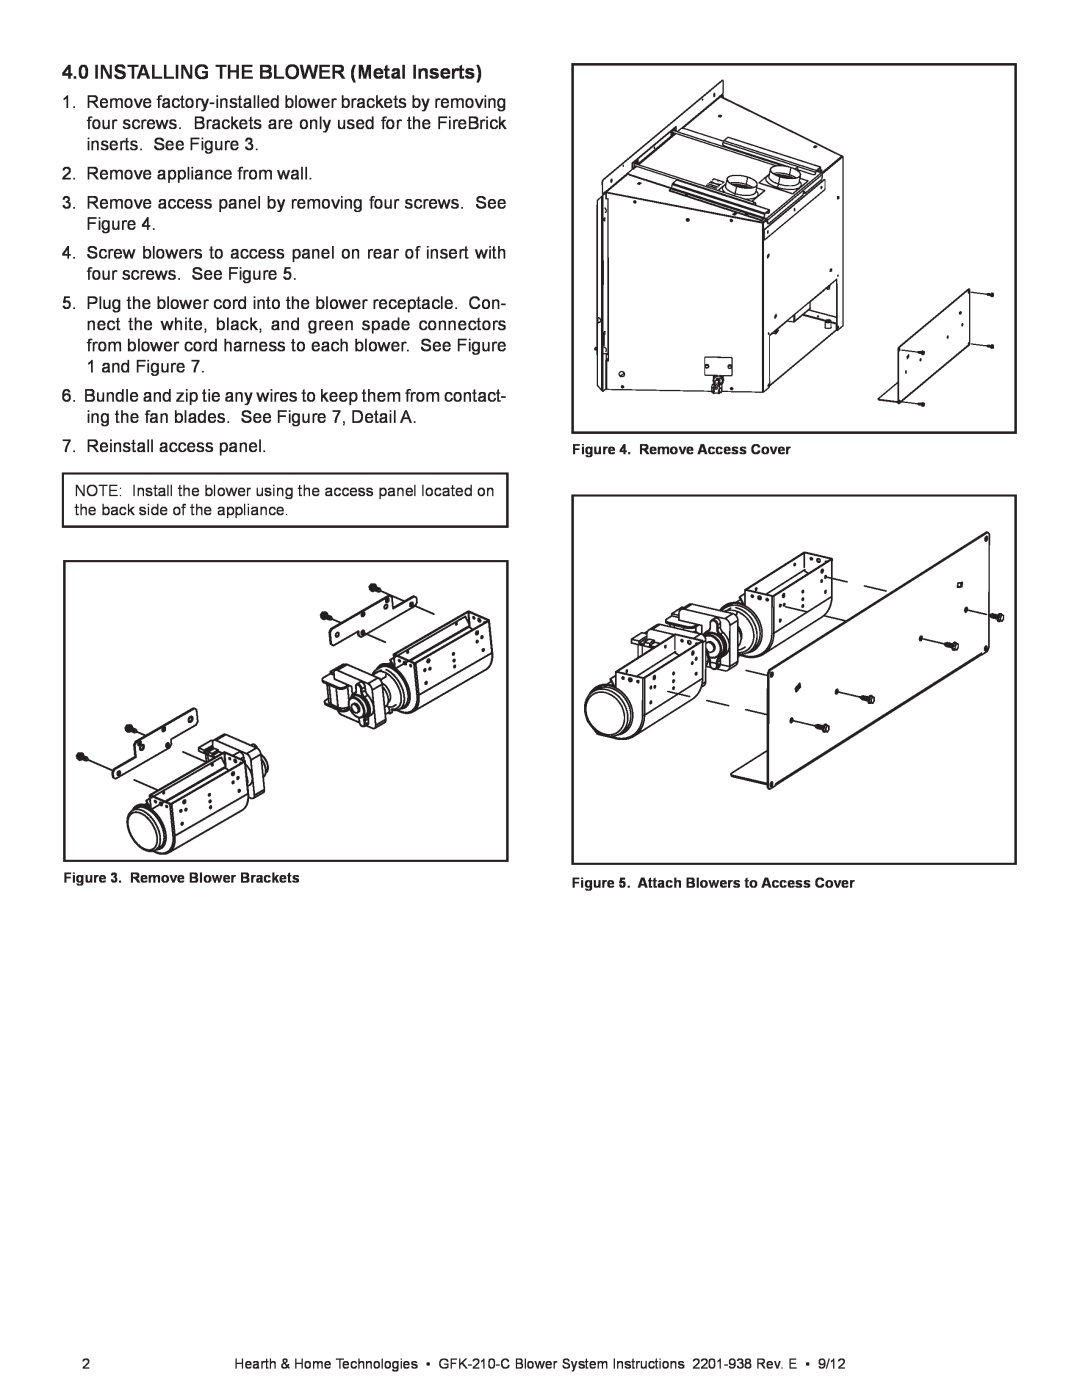 Hearth and Home Technologies GFK-210-C installation manual INSTALLING THE BLOWER Metal Inserts 